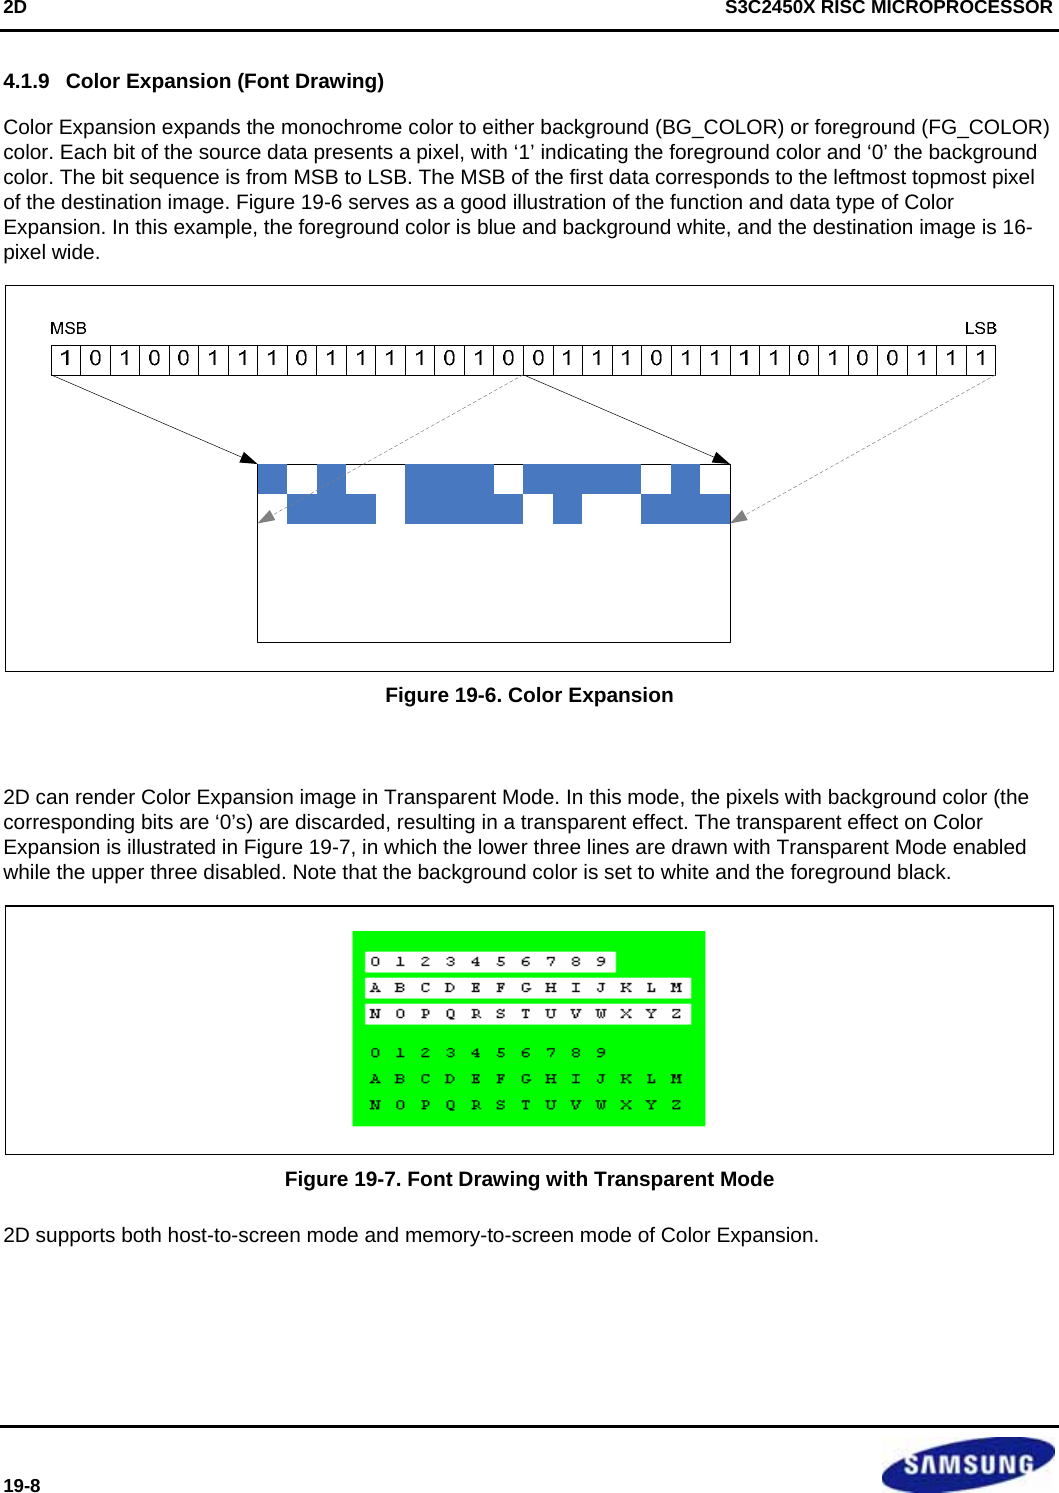 2D  S3C2450X RISC MICROPROCESSOR 19-8    4.1.9  Color Expansion (Font Drawing) Color Expansion expands the monochrome color to either background (BG_COLOR) or foreground (FG_COLOR) color. Each bit of the source data presents a pixel, with ‘1’ indicating the foreground color and ‘0’ the background color. The bit sequence is from MSB to LSB. The MSB of the first data corresponds to the leftmost topmost pixel of the destination image. Figure 19-6 serves as a good illustration of the function and data type of Color Expansion. In this example, the foreground color is blue and background white, and the destination image is 16-pixel wide.    Figure 19-6. Color Expansion  2D can render Color Expansion image in Transparent Mode. In this mode, the pixels with background color (the corresponding bits are ‘0’s) are discarded, resulting in a transparent effect. The transparent effect on Color Expansion is illustrated in Figure 19-7, in which the lower three lines are drawn with Transparent Mode enabled while the upper three disabled. Note that the background color is set to white and the foreground black.    Figure 19-7. Font Drawing with Transparent Mode 2D supports both host-to-screen mode and memory-to-screen mode of Color Expansion.         